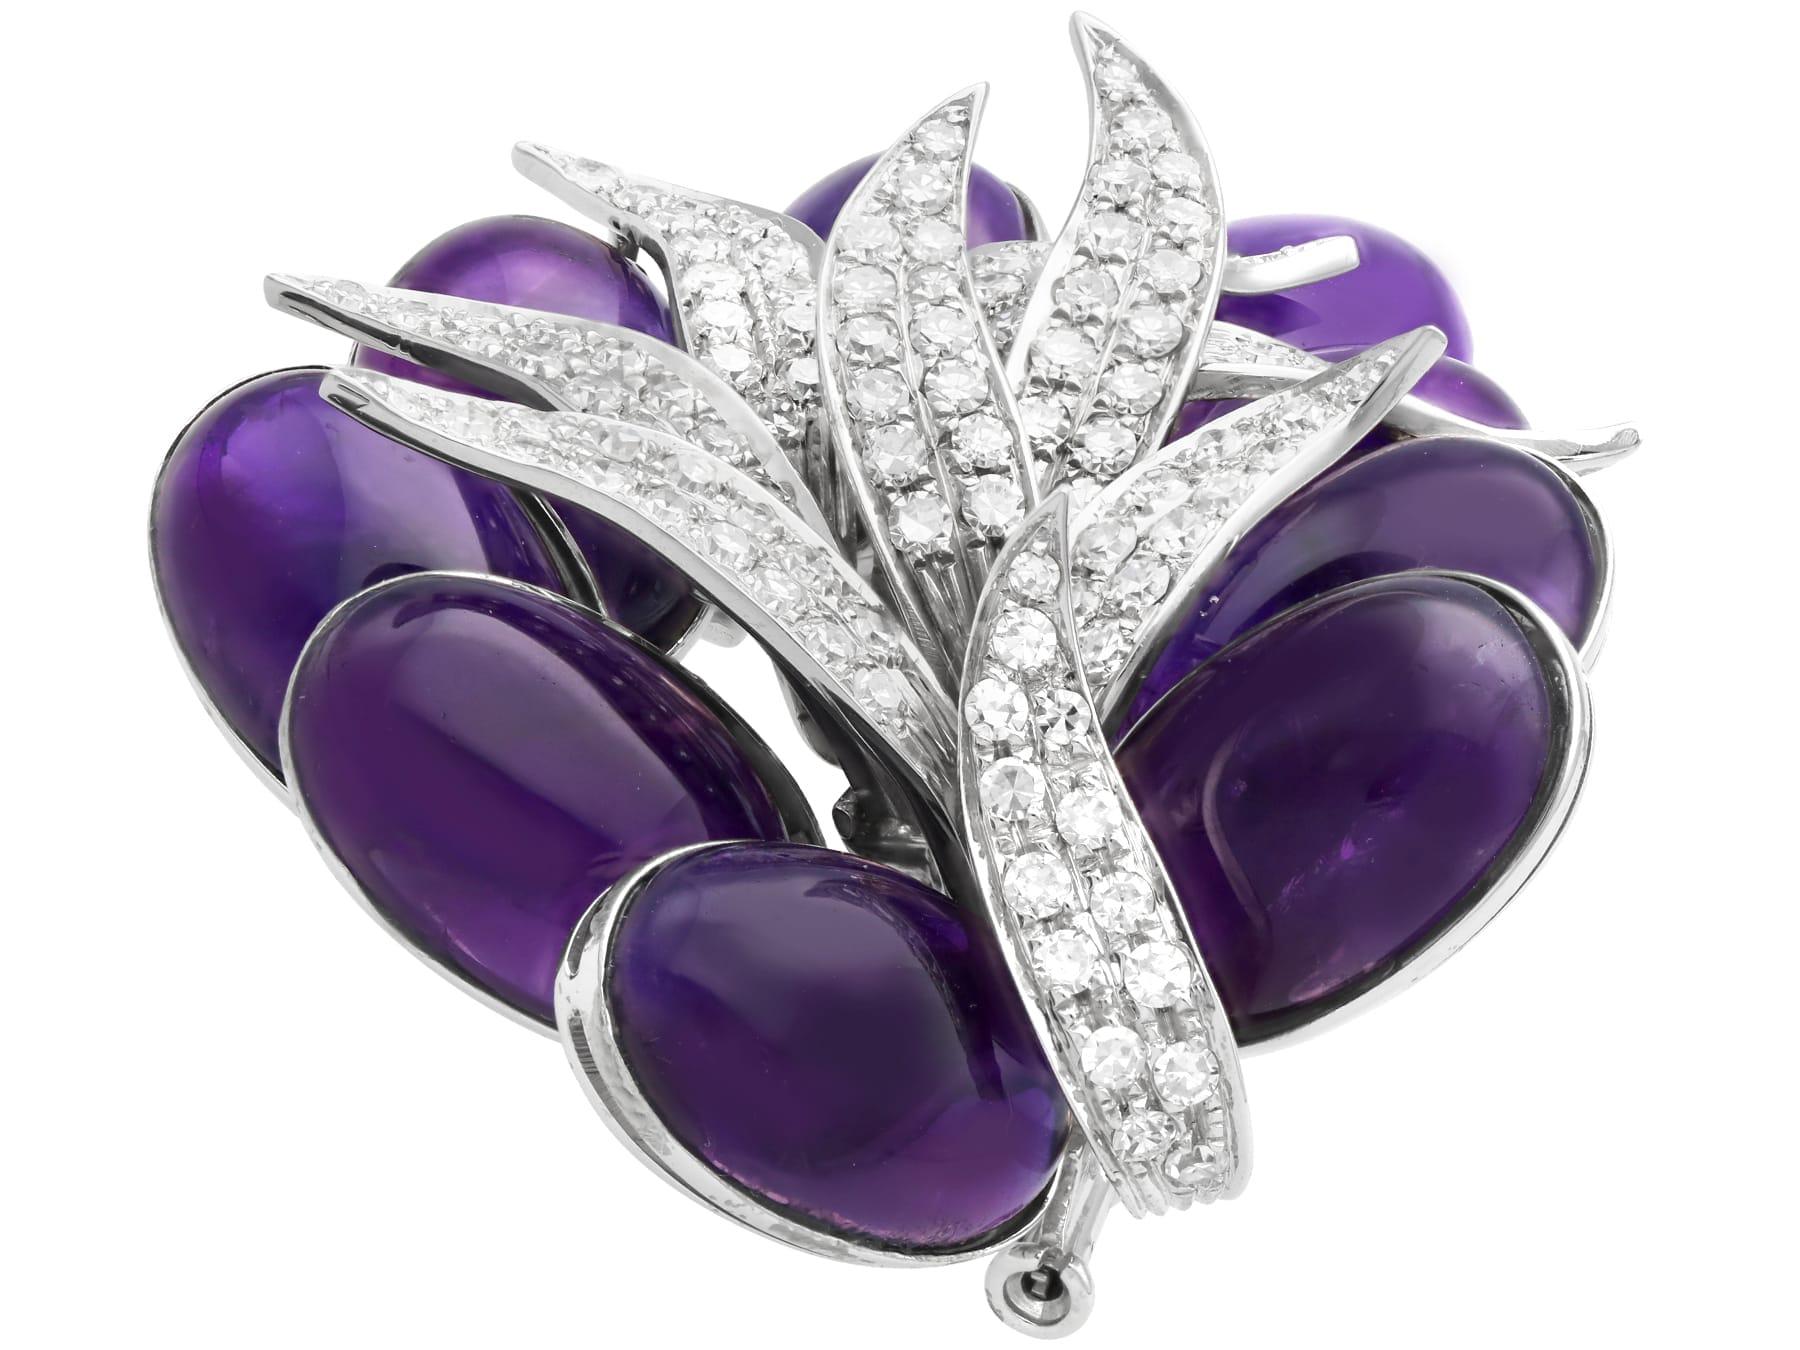 Cabochon Vintage 55Ct Amethyst and 3.02Ct Diamond 18k White Gold Brooch Circa 1950 For Sale